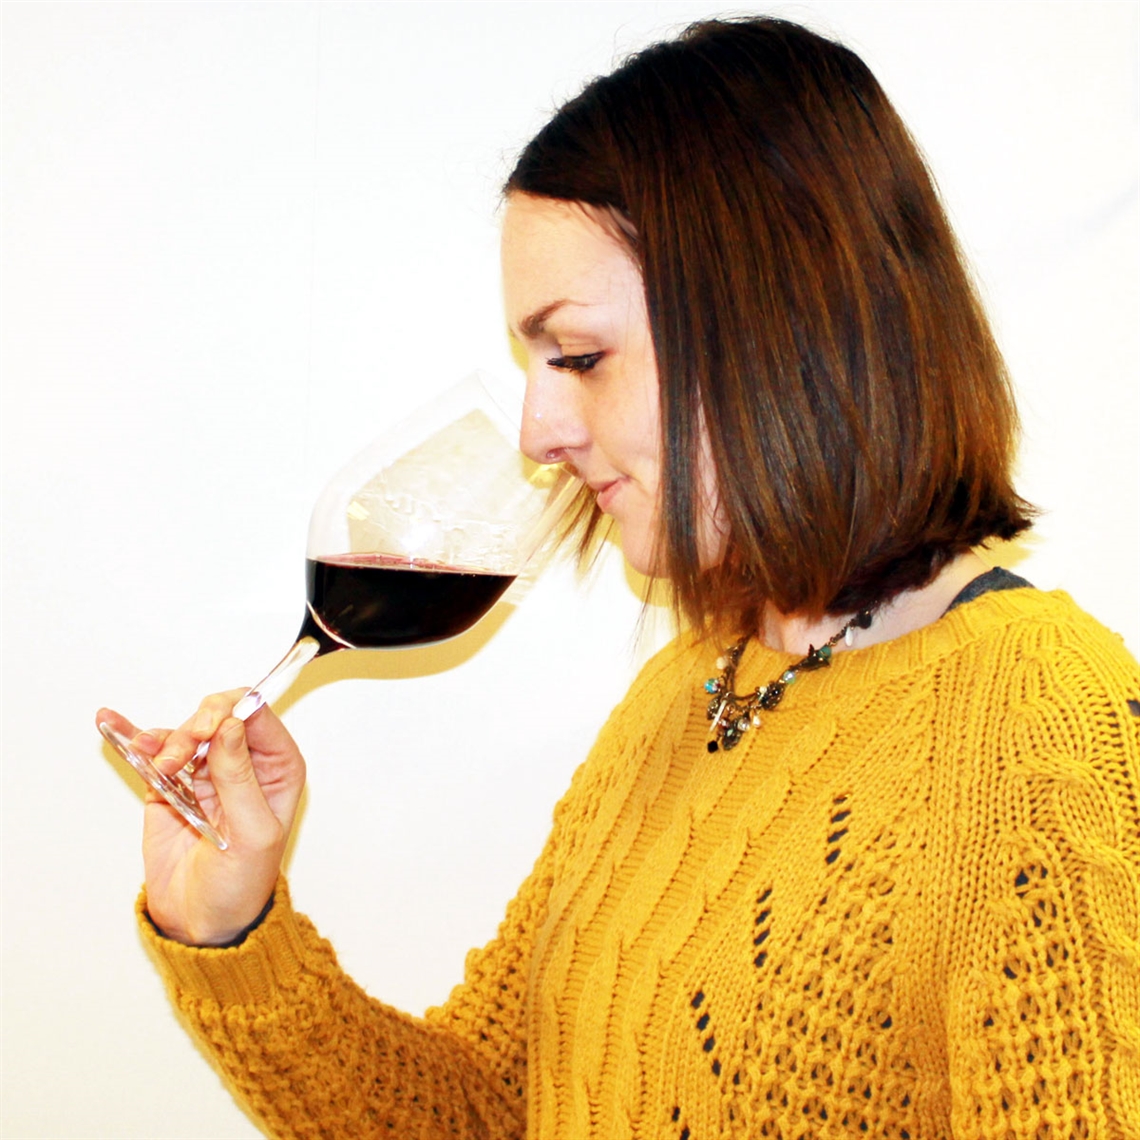 How to Taste Wine - A Complete Guide 